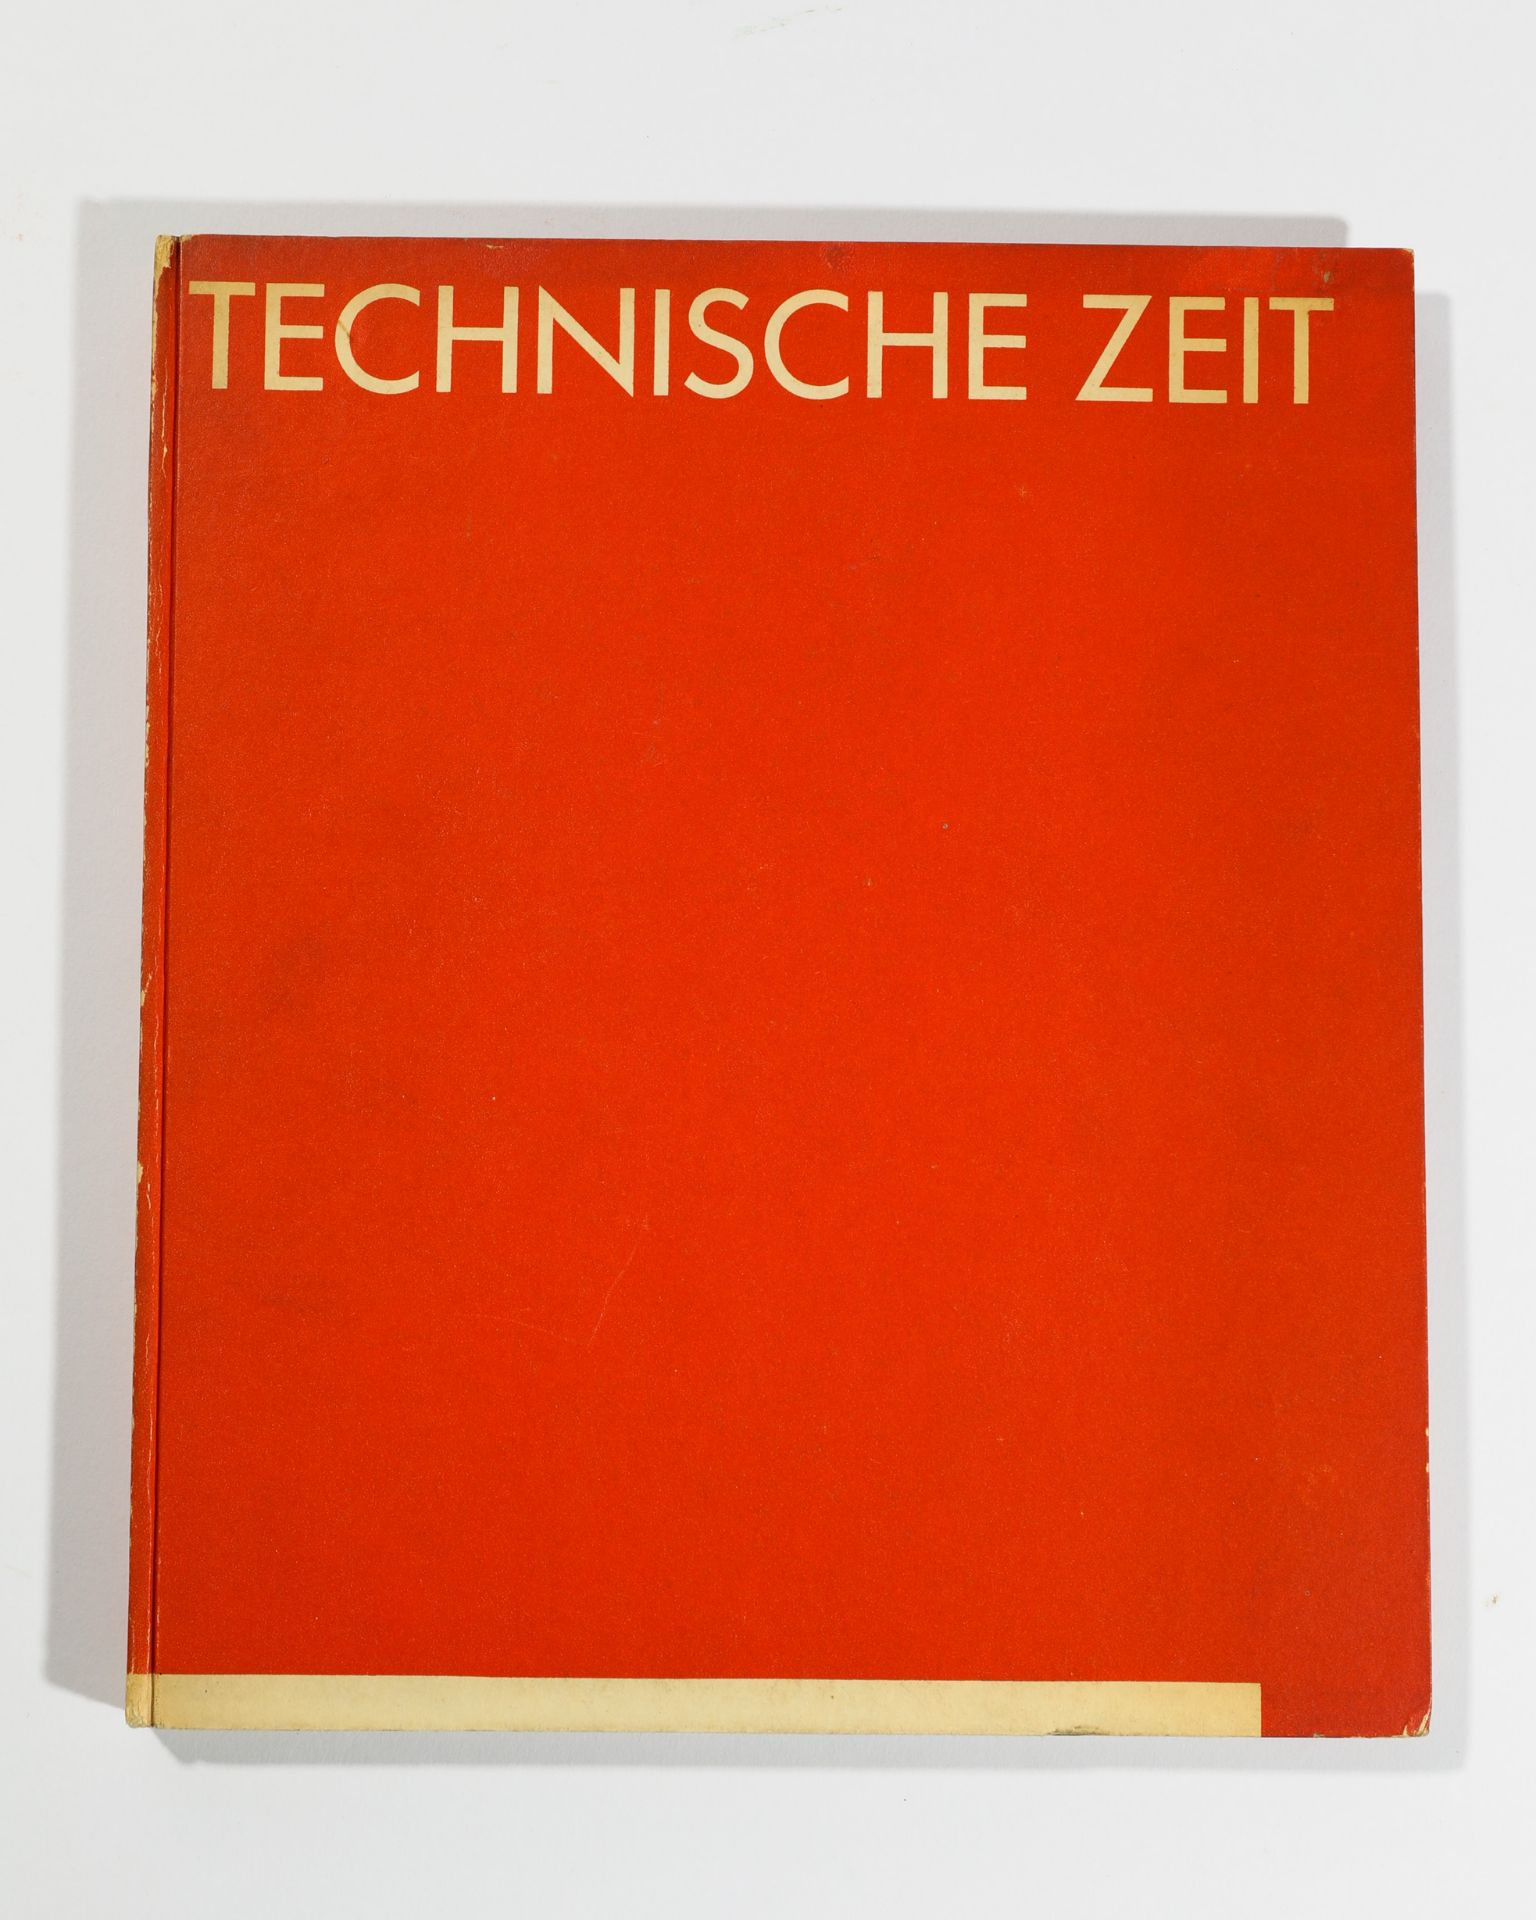 Max Burchartz, 6 Books/ Typographies after his designs - Image 18 of 21